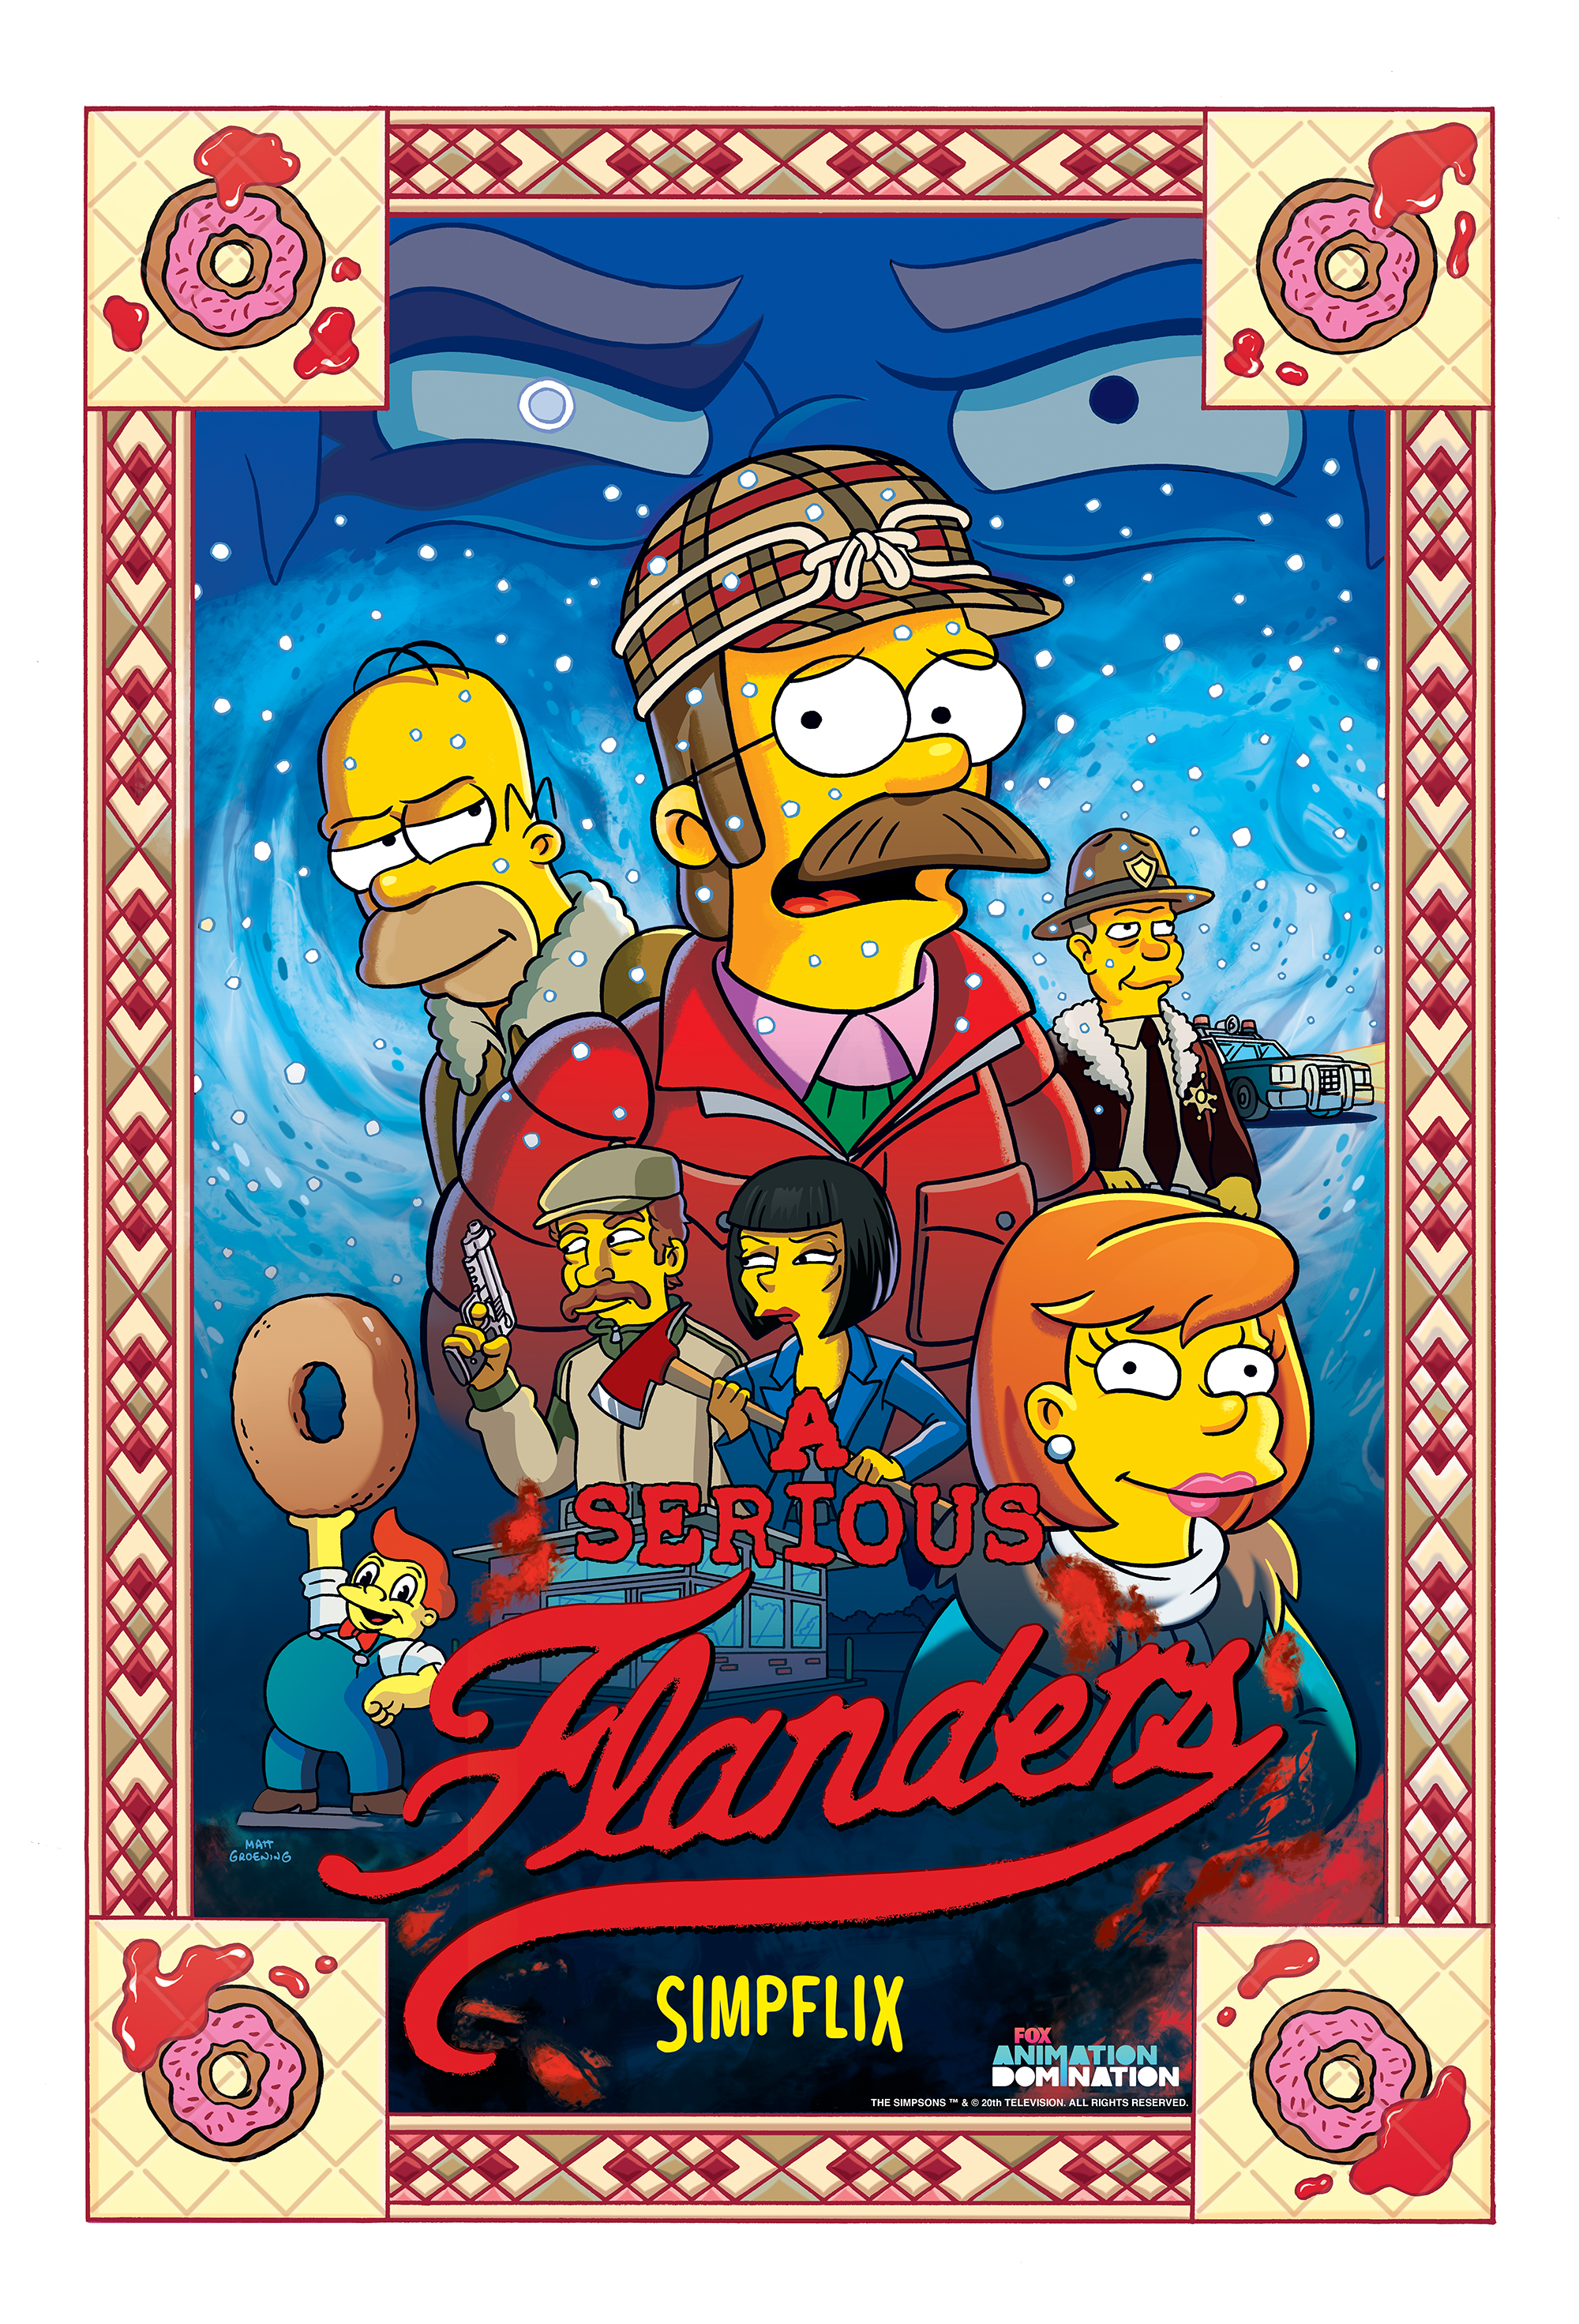 A_Serious_Flanders_poster.png